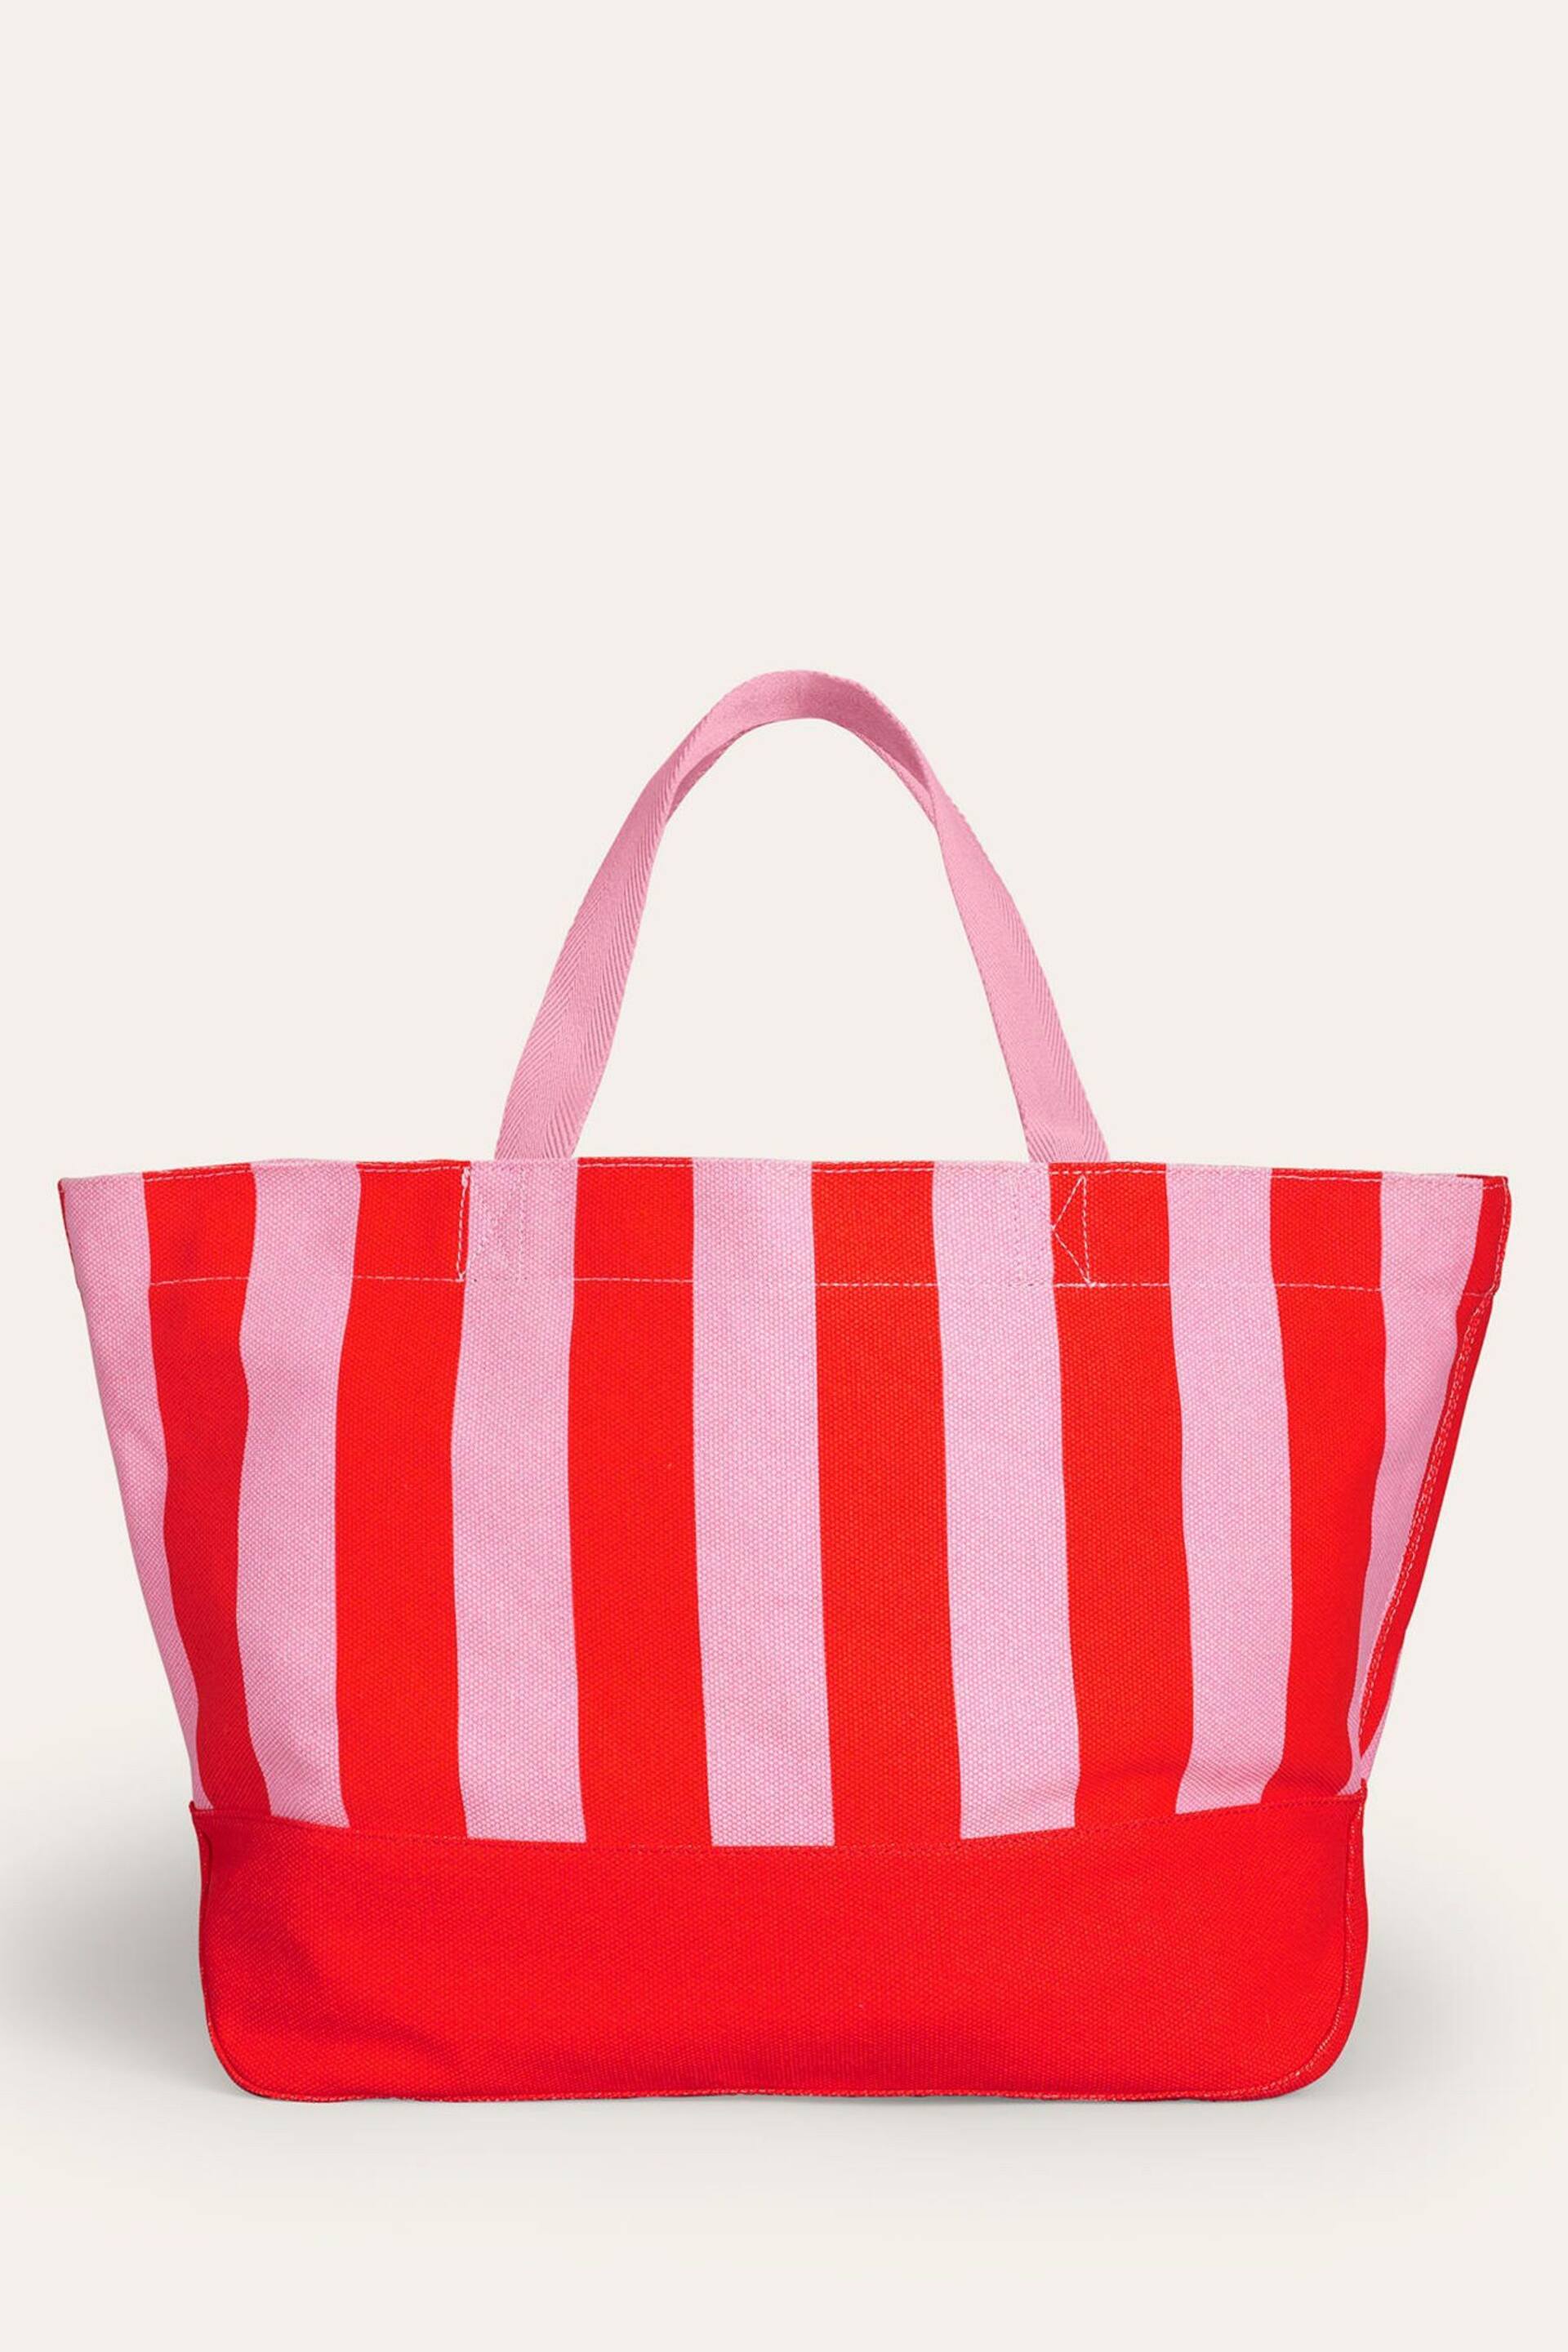 Boden Red Relaxed Canvas Tote Bag - Image 2 of 4